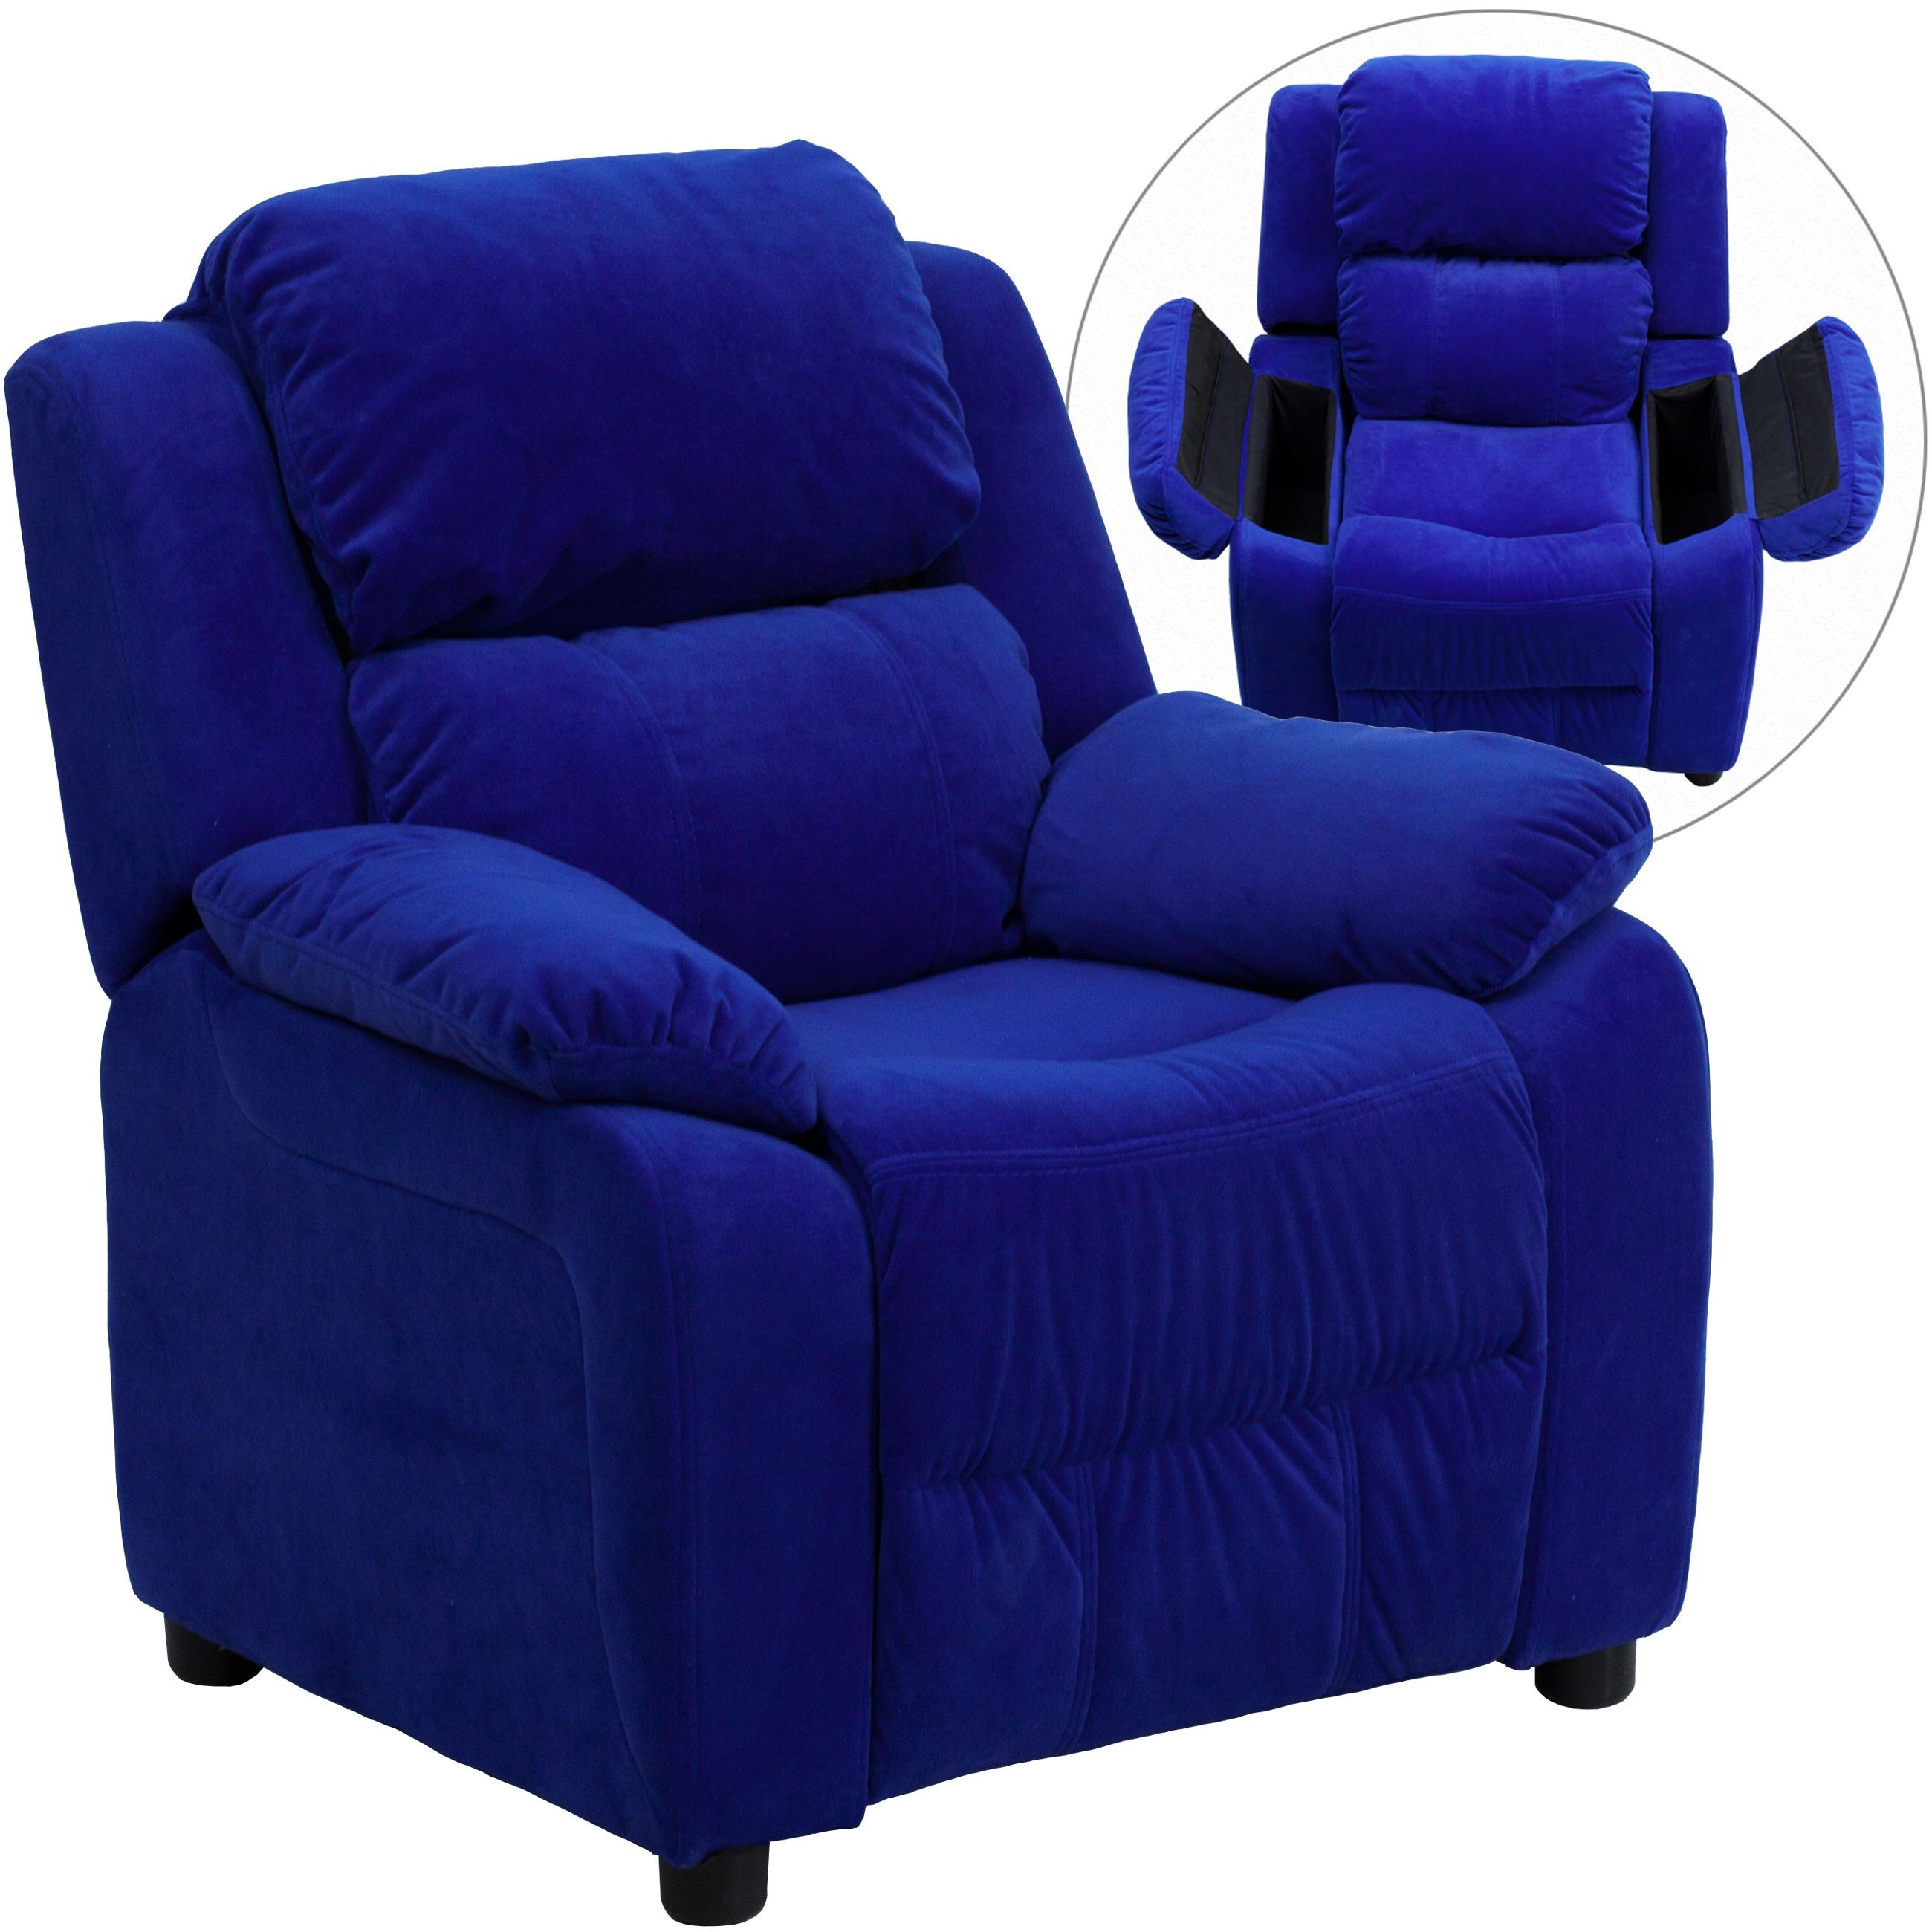 Flash Furniture BT-7985-KID-MIC-BLUE-GG Deluxe Heavily Padded Contemporary Blue Microfiber Kids Recliner with Storage Arms